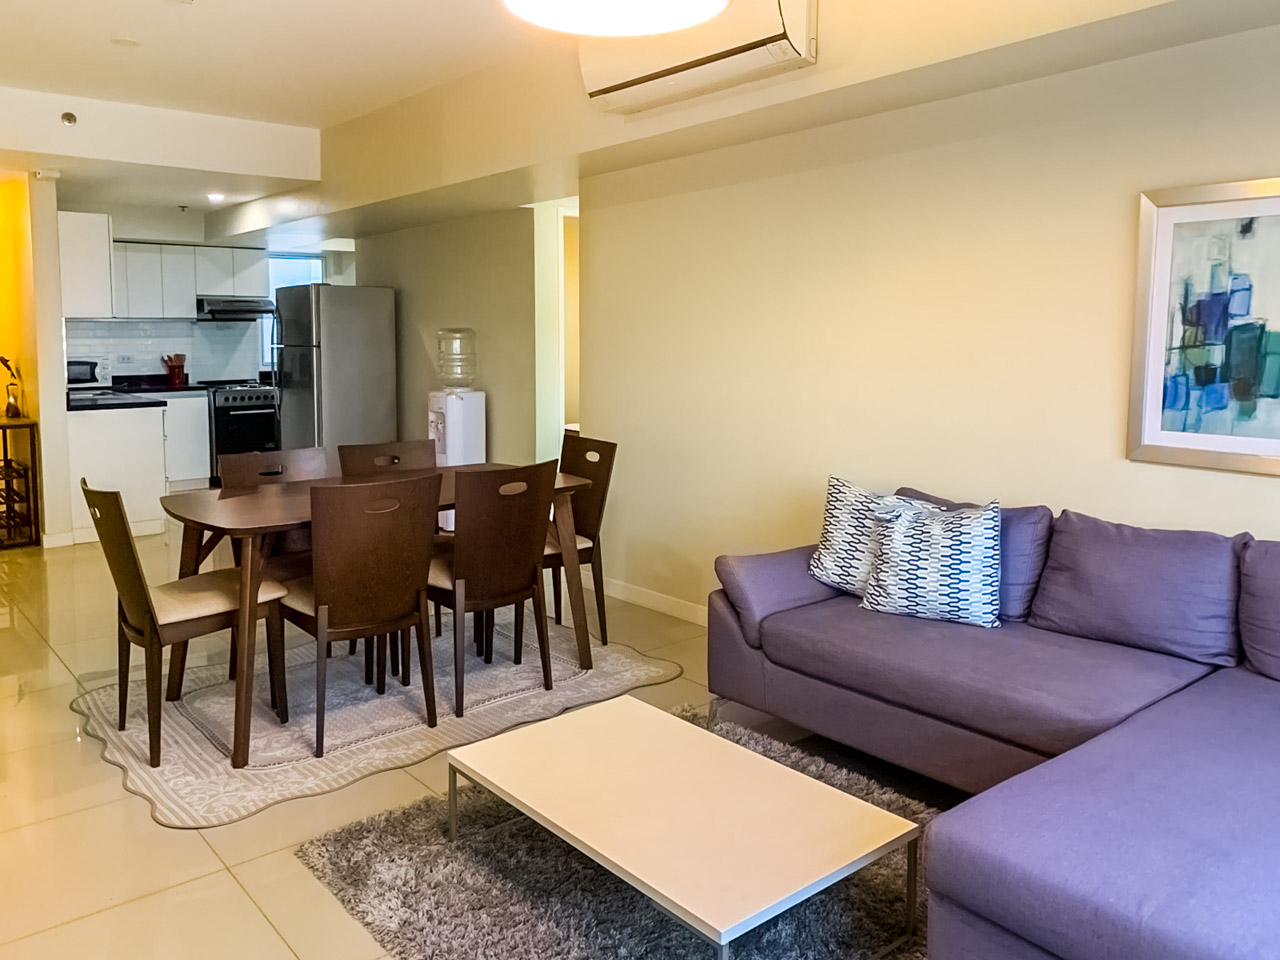 RCSP4 Furnished 2 Bedroom Condo for Rent in Cebu Business Park - 4